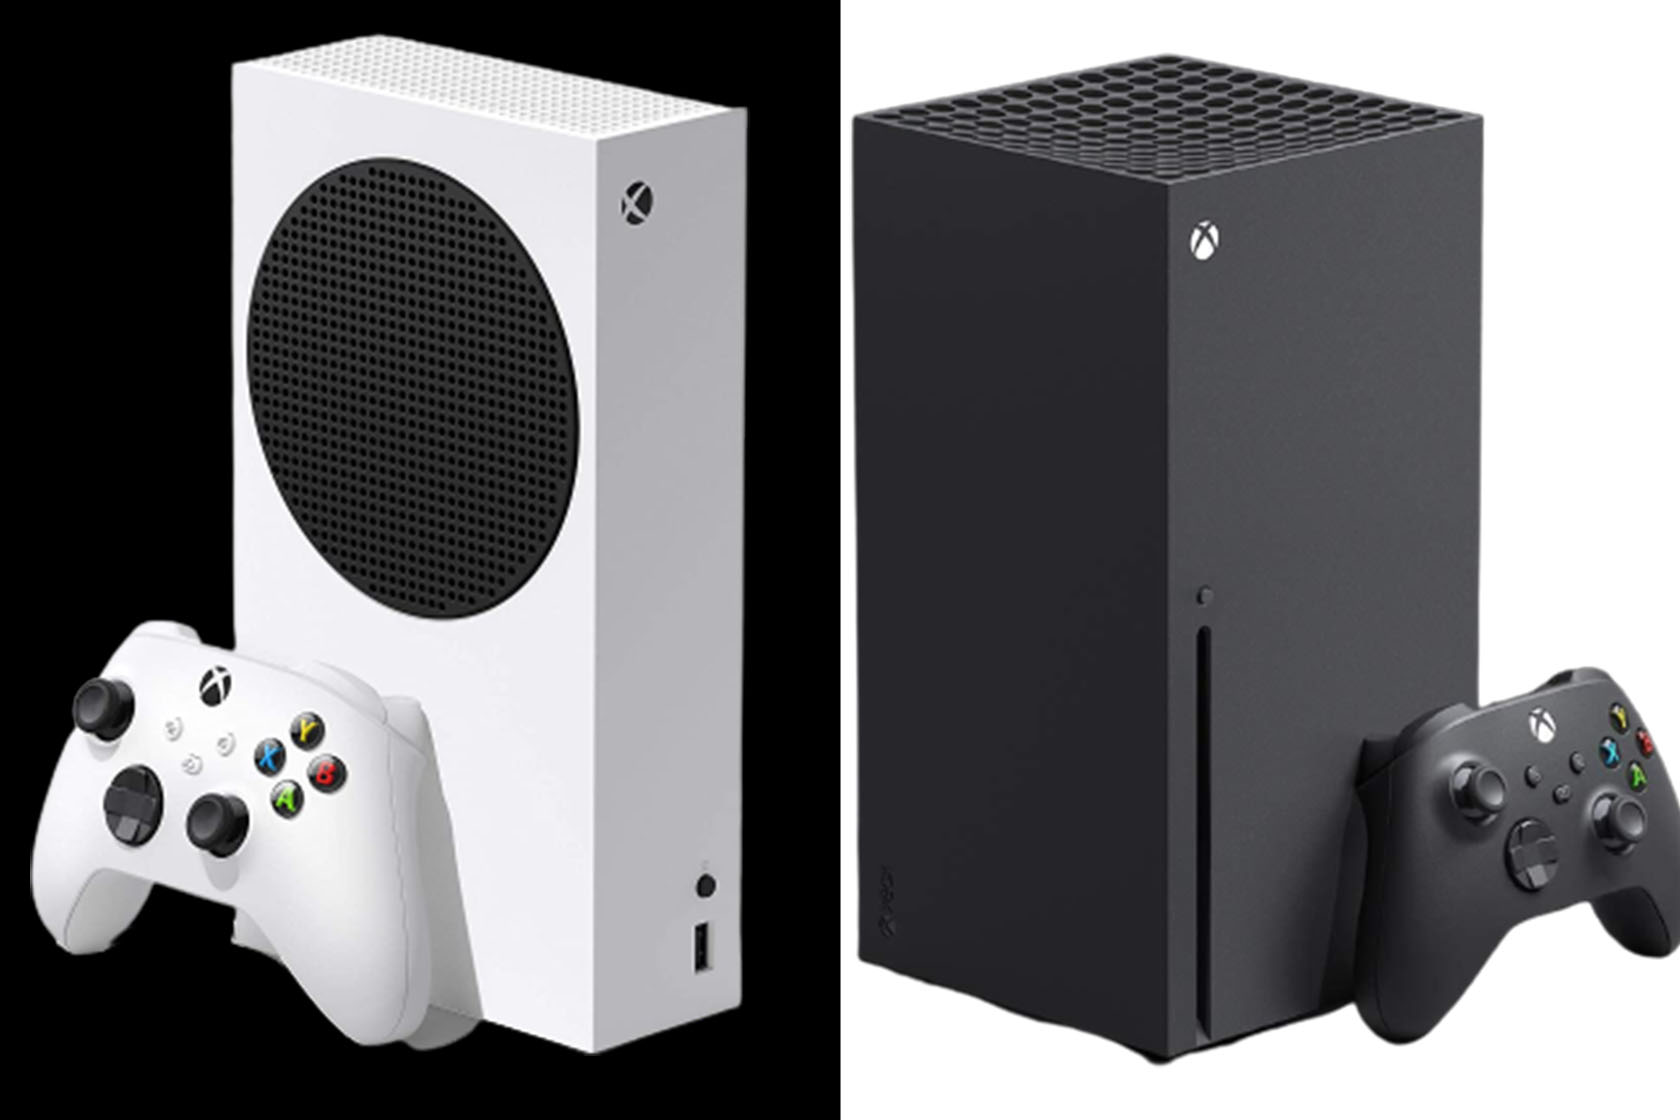 How the Xbox Series X and Series S differ